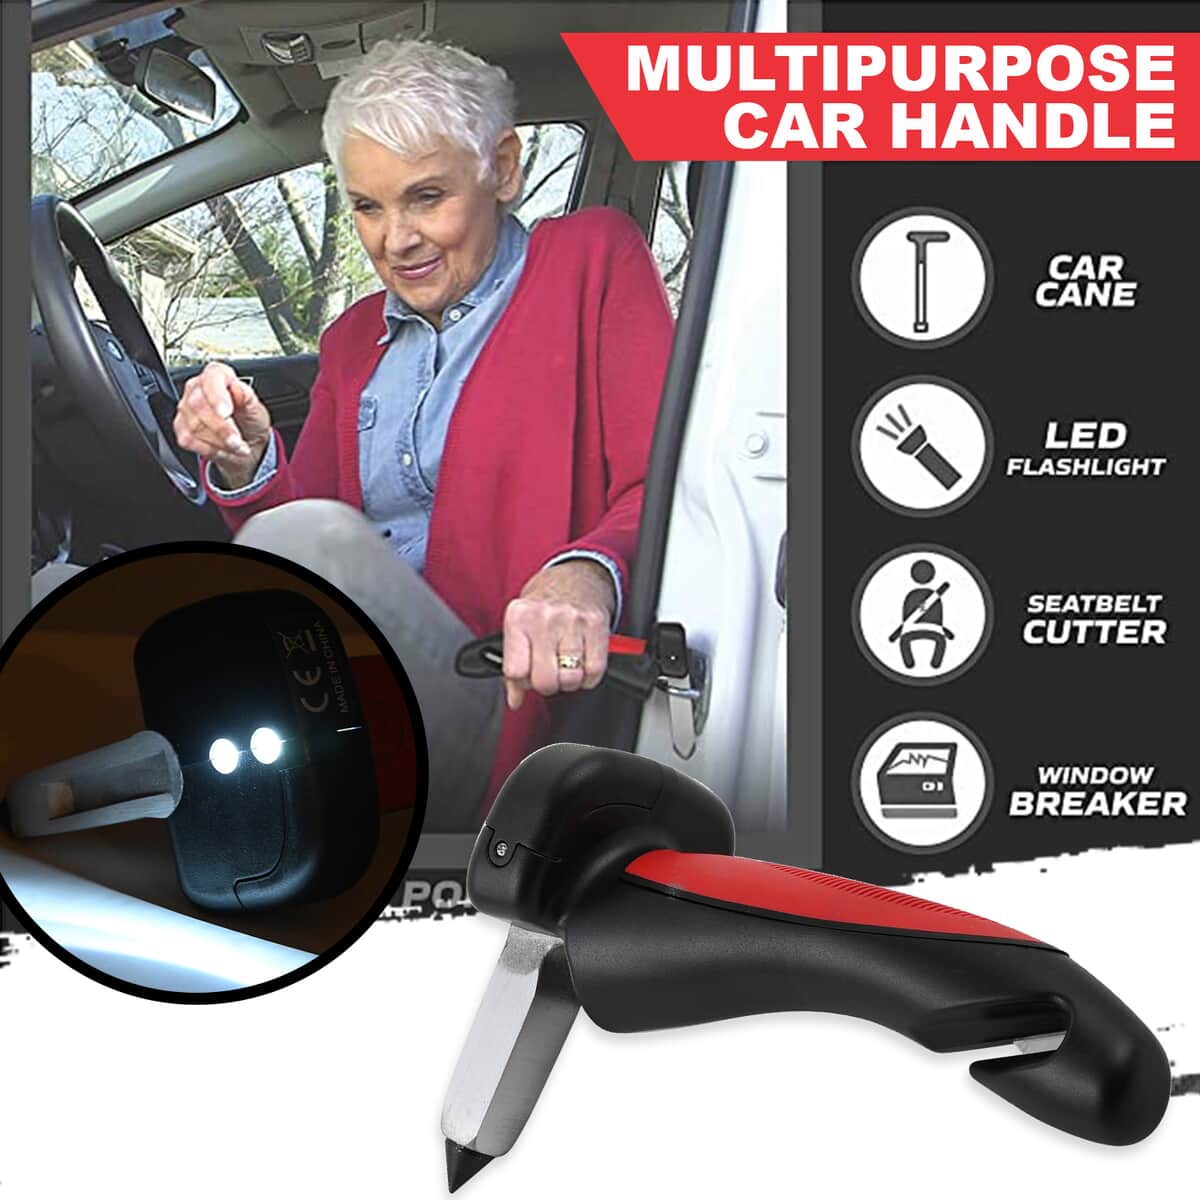 Black and Red Battery-Operated, Multi-purpose Non-Slip Grip Automotive Car Handle for Mobility Aid and Cane Support With Seat Belt Cutter, Window Breaker and LED Flashlight (2xCR2032 Included) image number 1